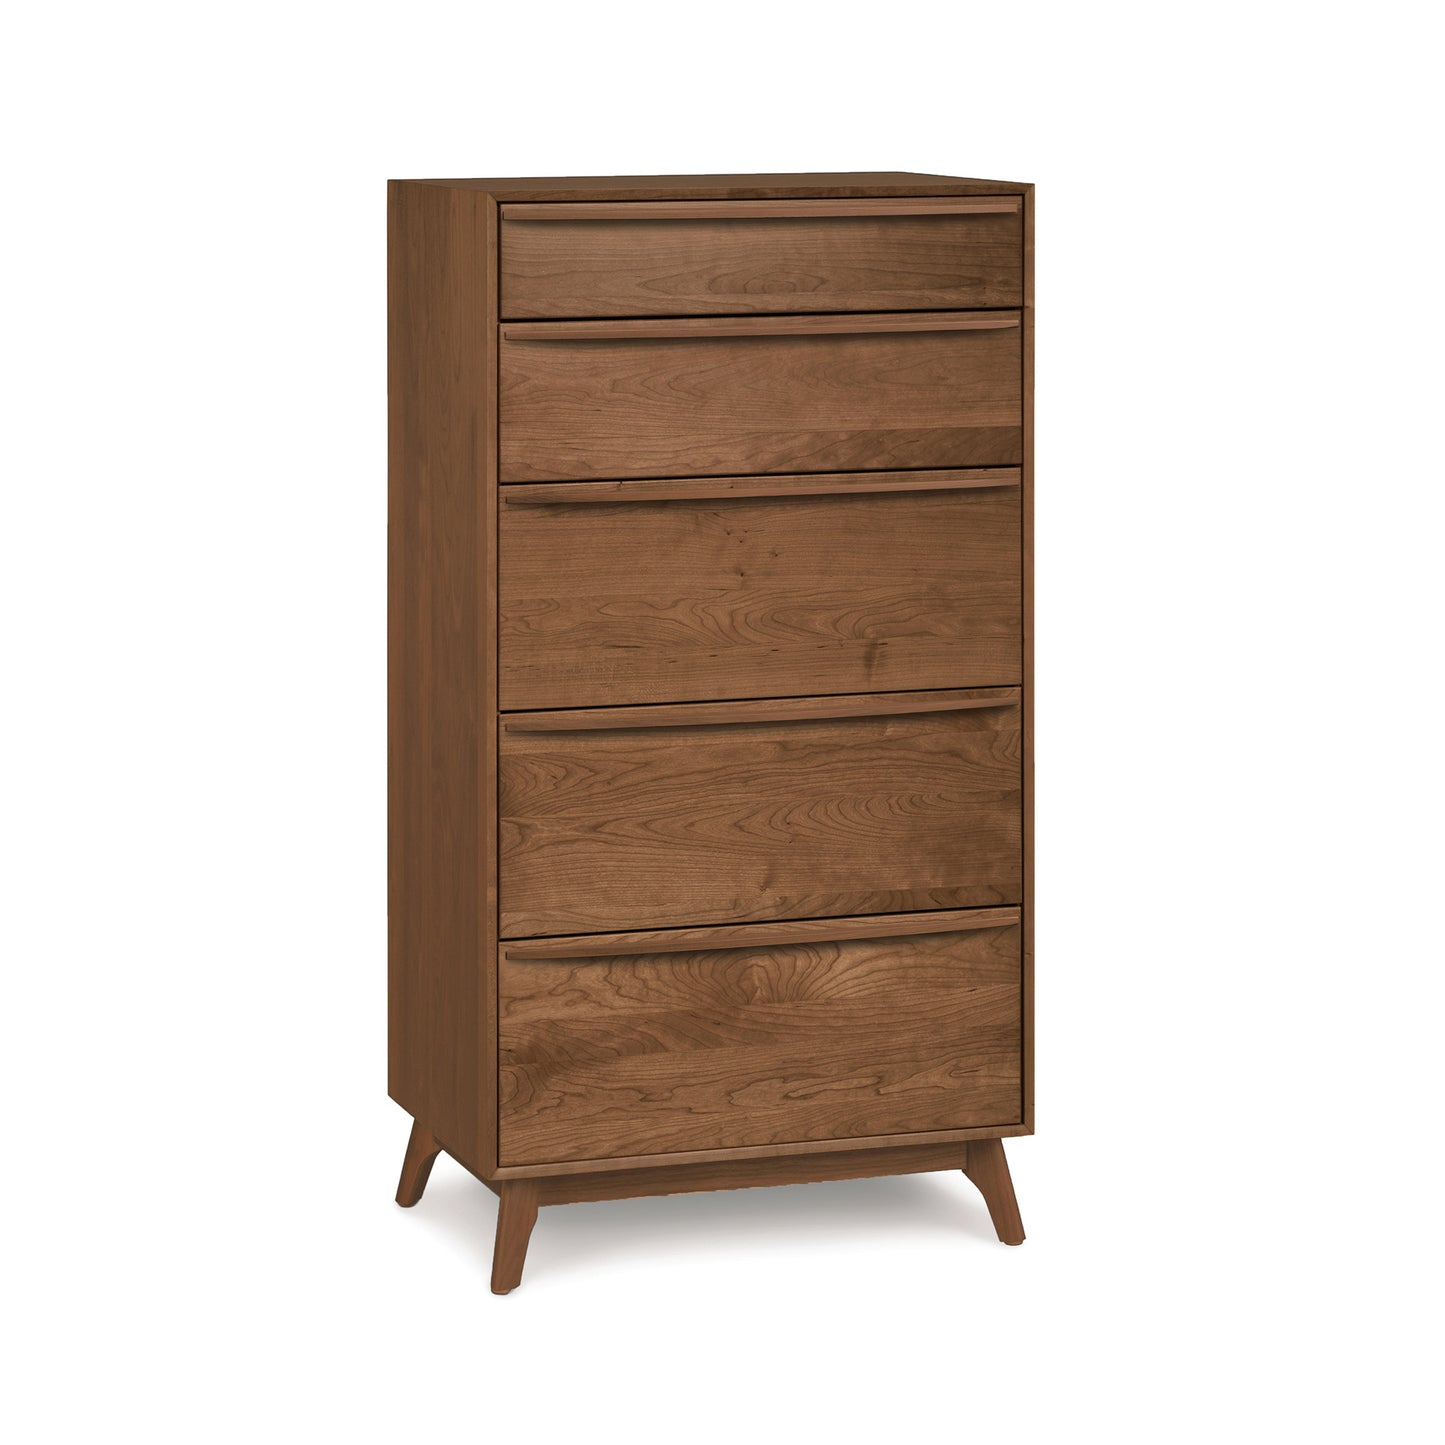 A solid wood construction Catalina 5-Drawer Chest from the Copeland Furniture Bedroom Collection, standing against a white background.